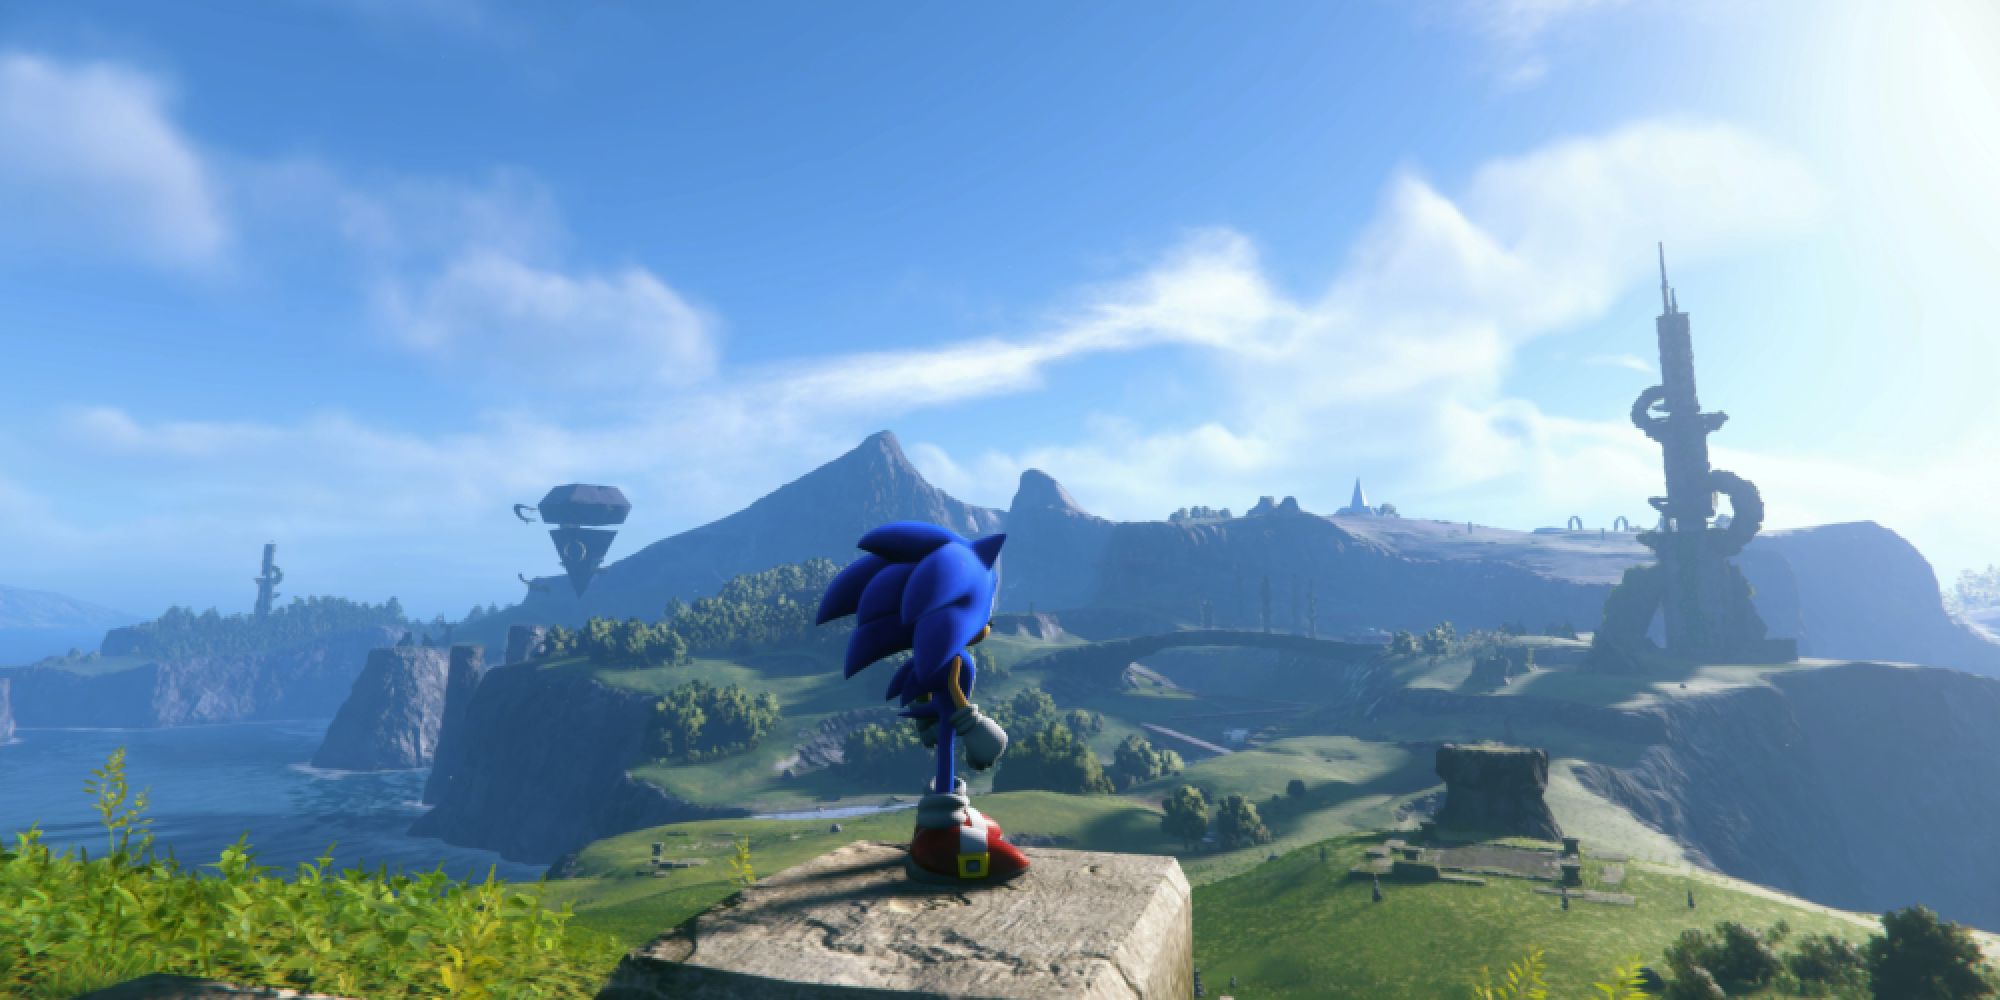 Sonic standing at a cliffside looking at the open world in the Sonic Frontiers trailer